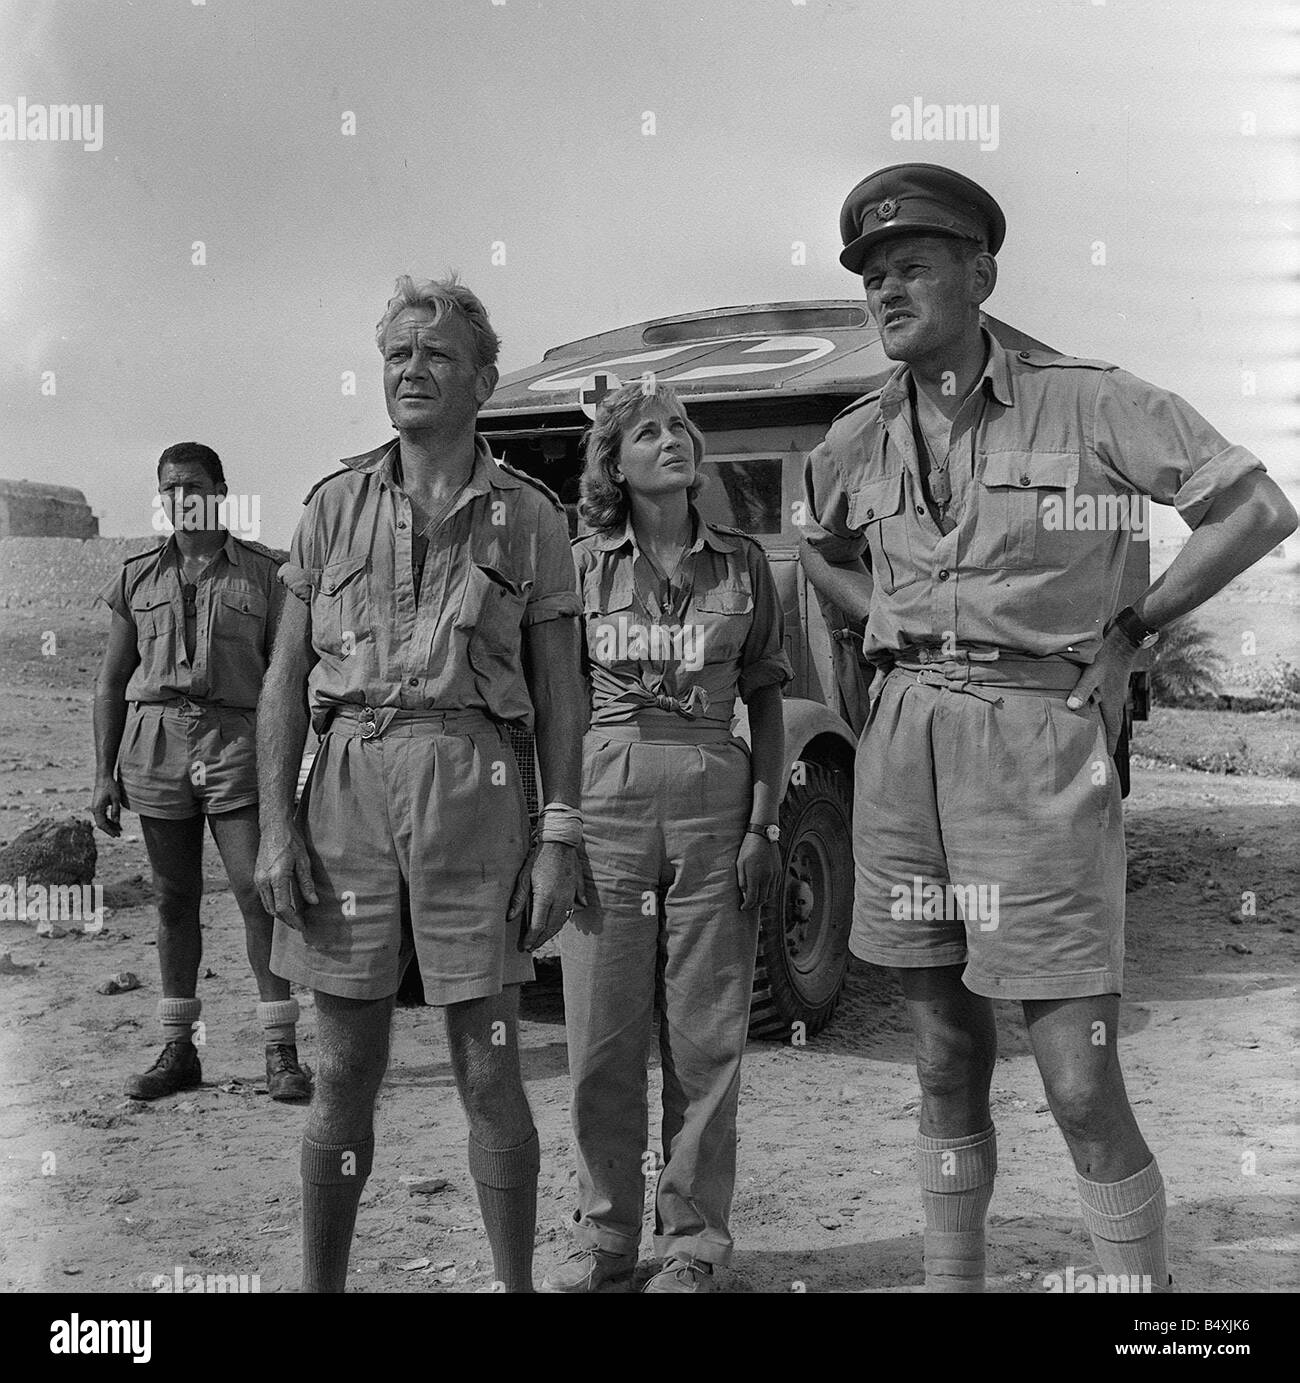 Ice Cold In Alex 1957 The things people will do for a beer Actors Anthony Quayle John Mills Sylvia Sims and Garry Andrews pictured on location during the making of the film Ice Cold In Alex Stock Photo